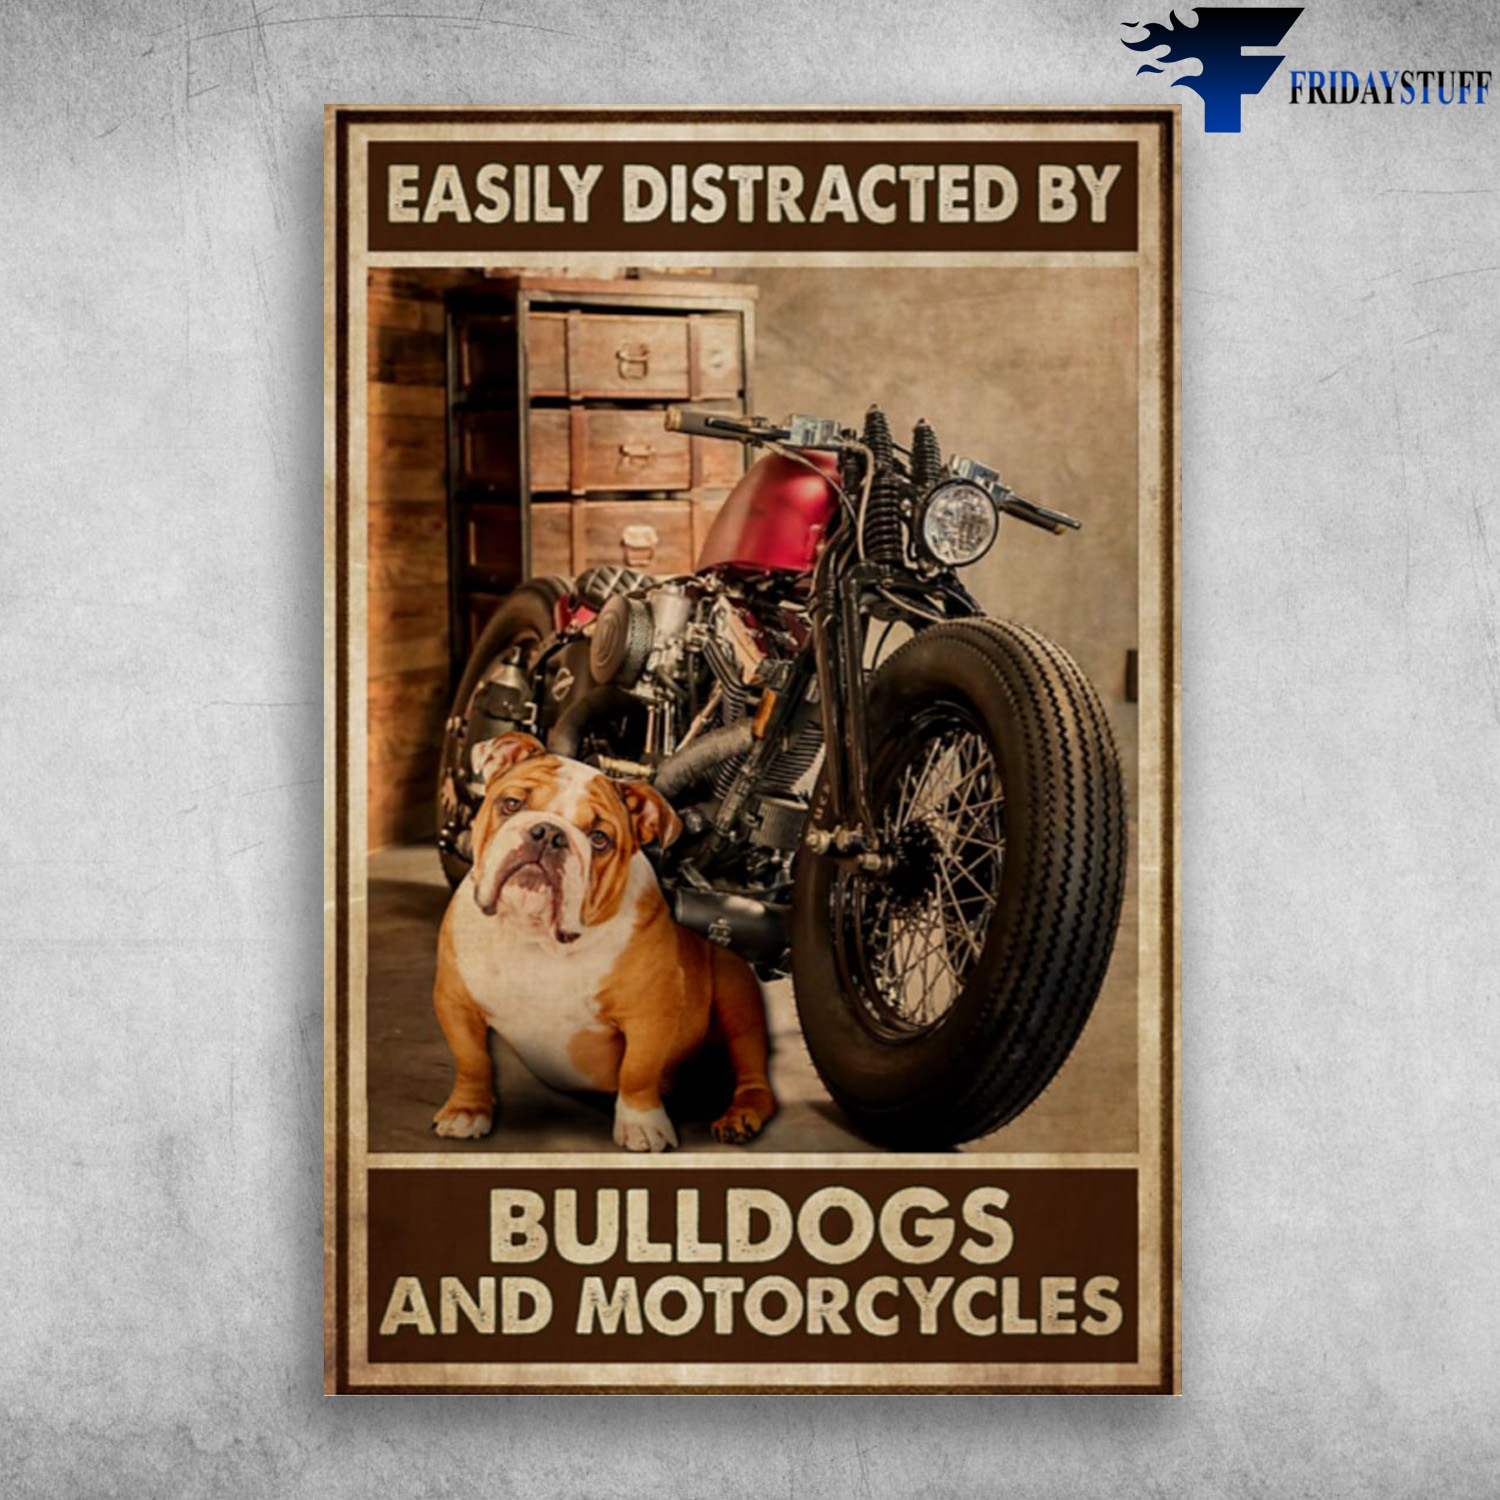 Bulldog And Motorcycles - Easily Distracred By Bulldogs And Motorcycles